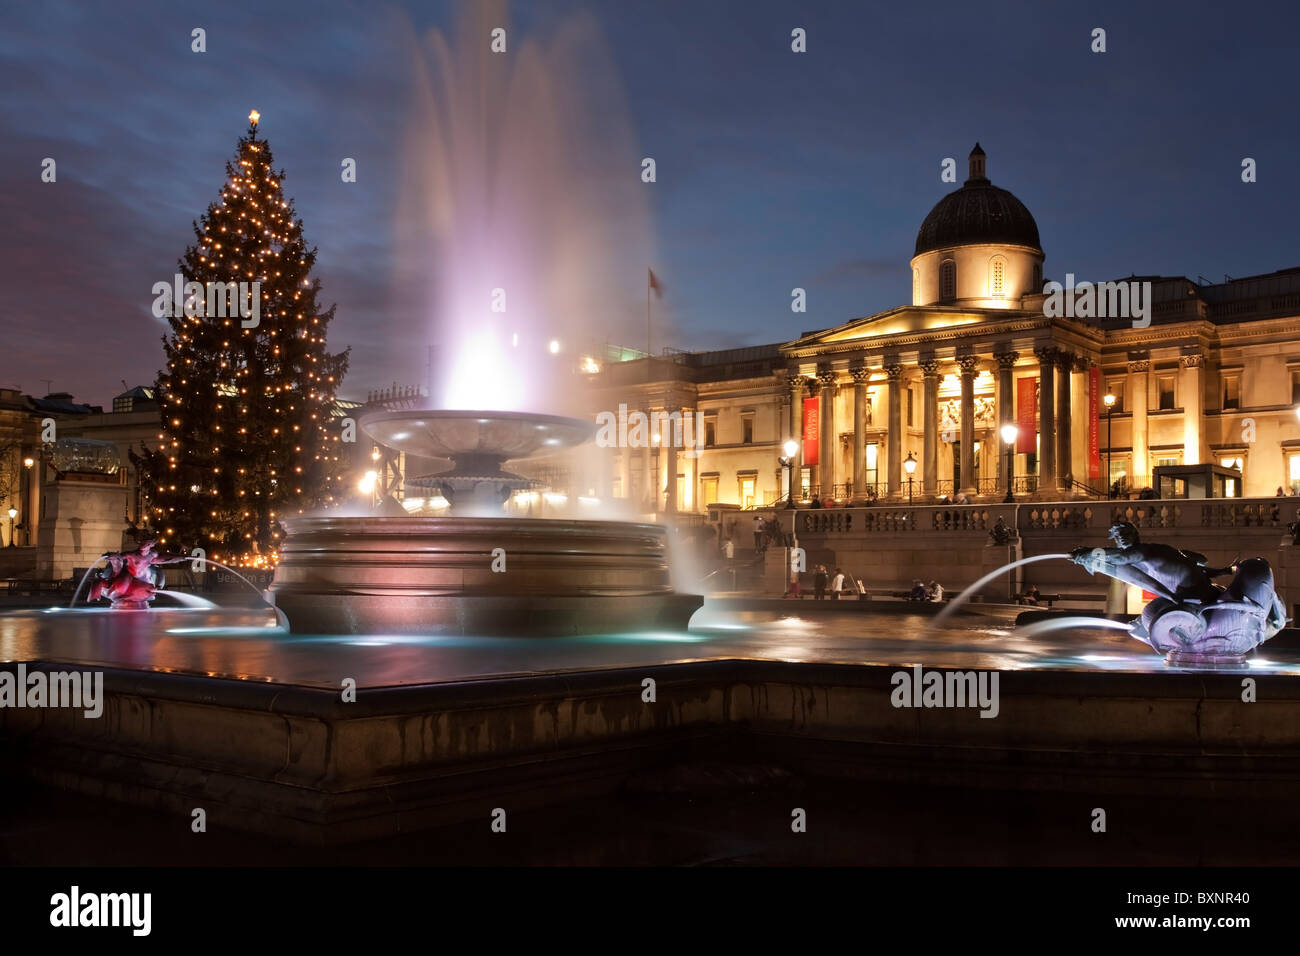 Dusk at Trafalgar Square looking towards the National Gallery through the water fountain and Christmas tree, London, Uk Stock Photo